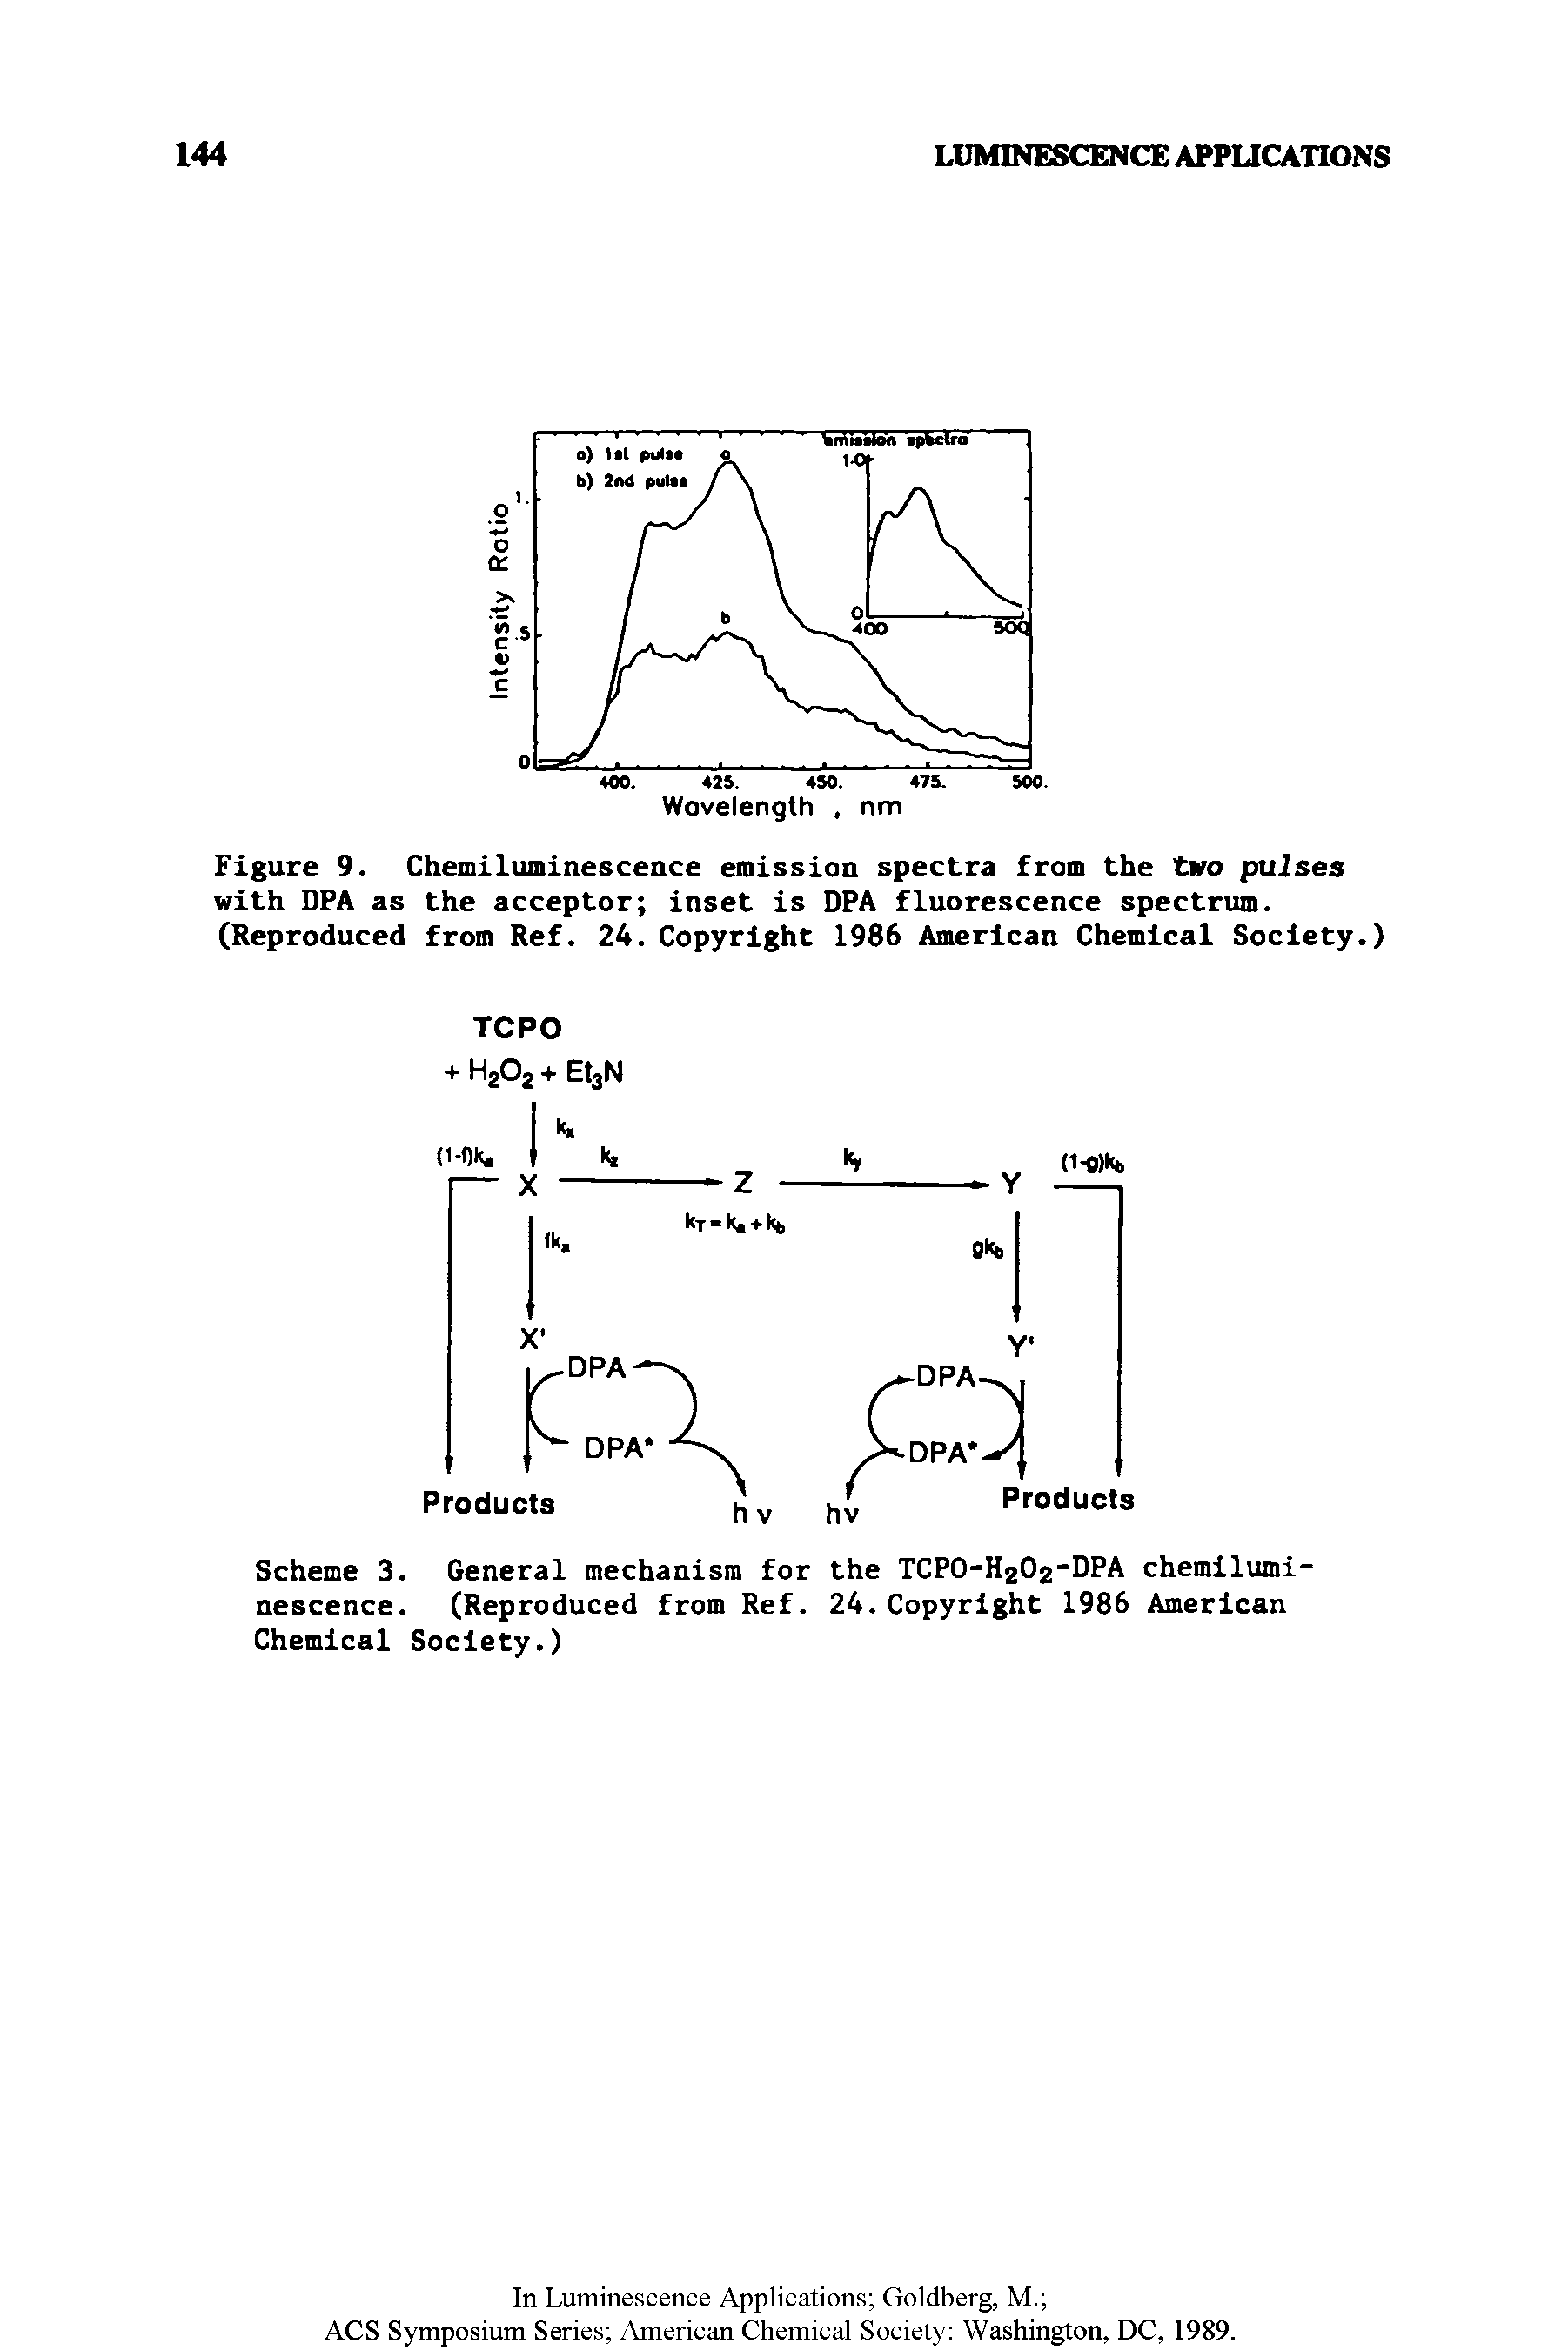 Figure 9. Chemiluminescence emission spectra from the two pulses with DPA as the acceptor inset is DPA fluorescence spectrum. (Reproduced from Ref. 24. Copyright 1986 American Chemical Society.)...